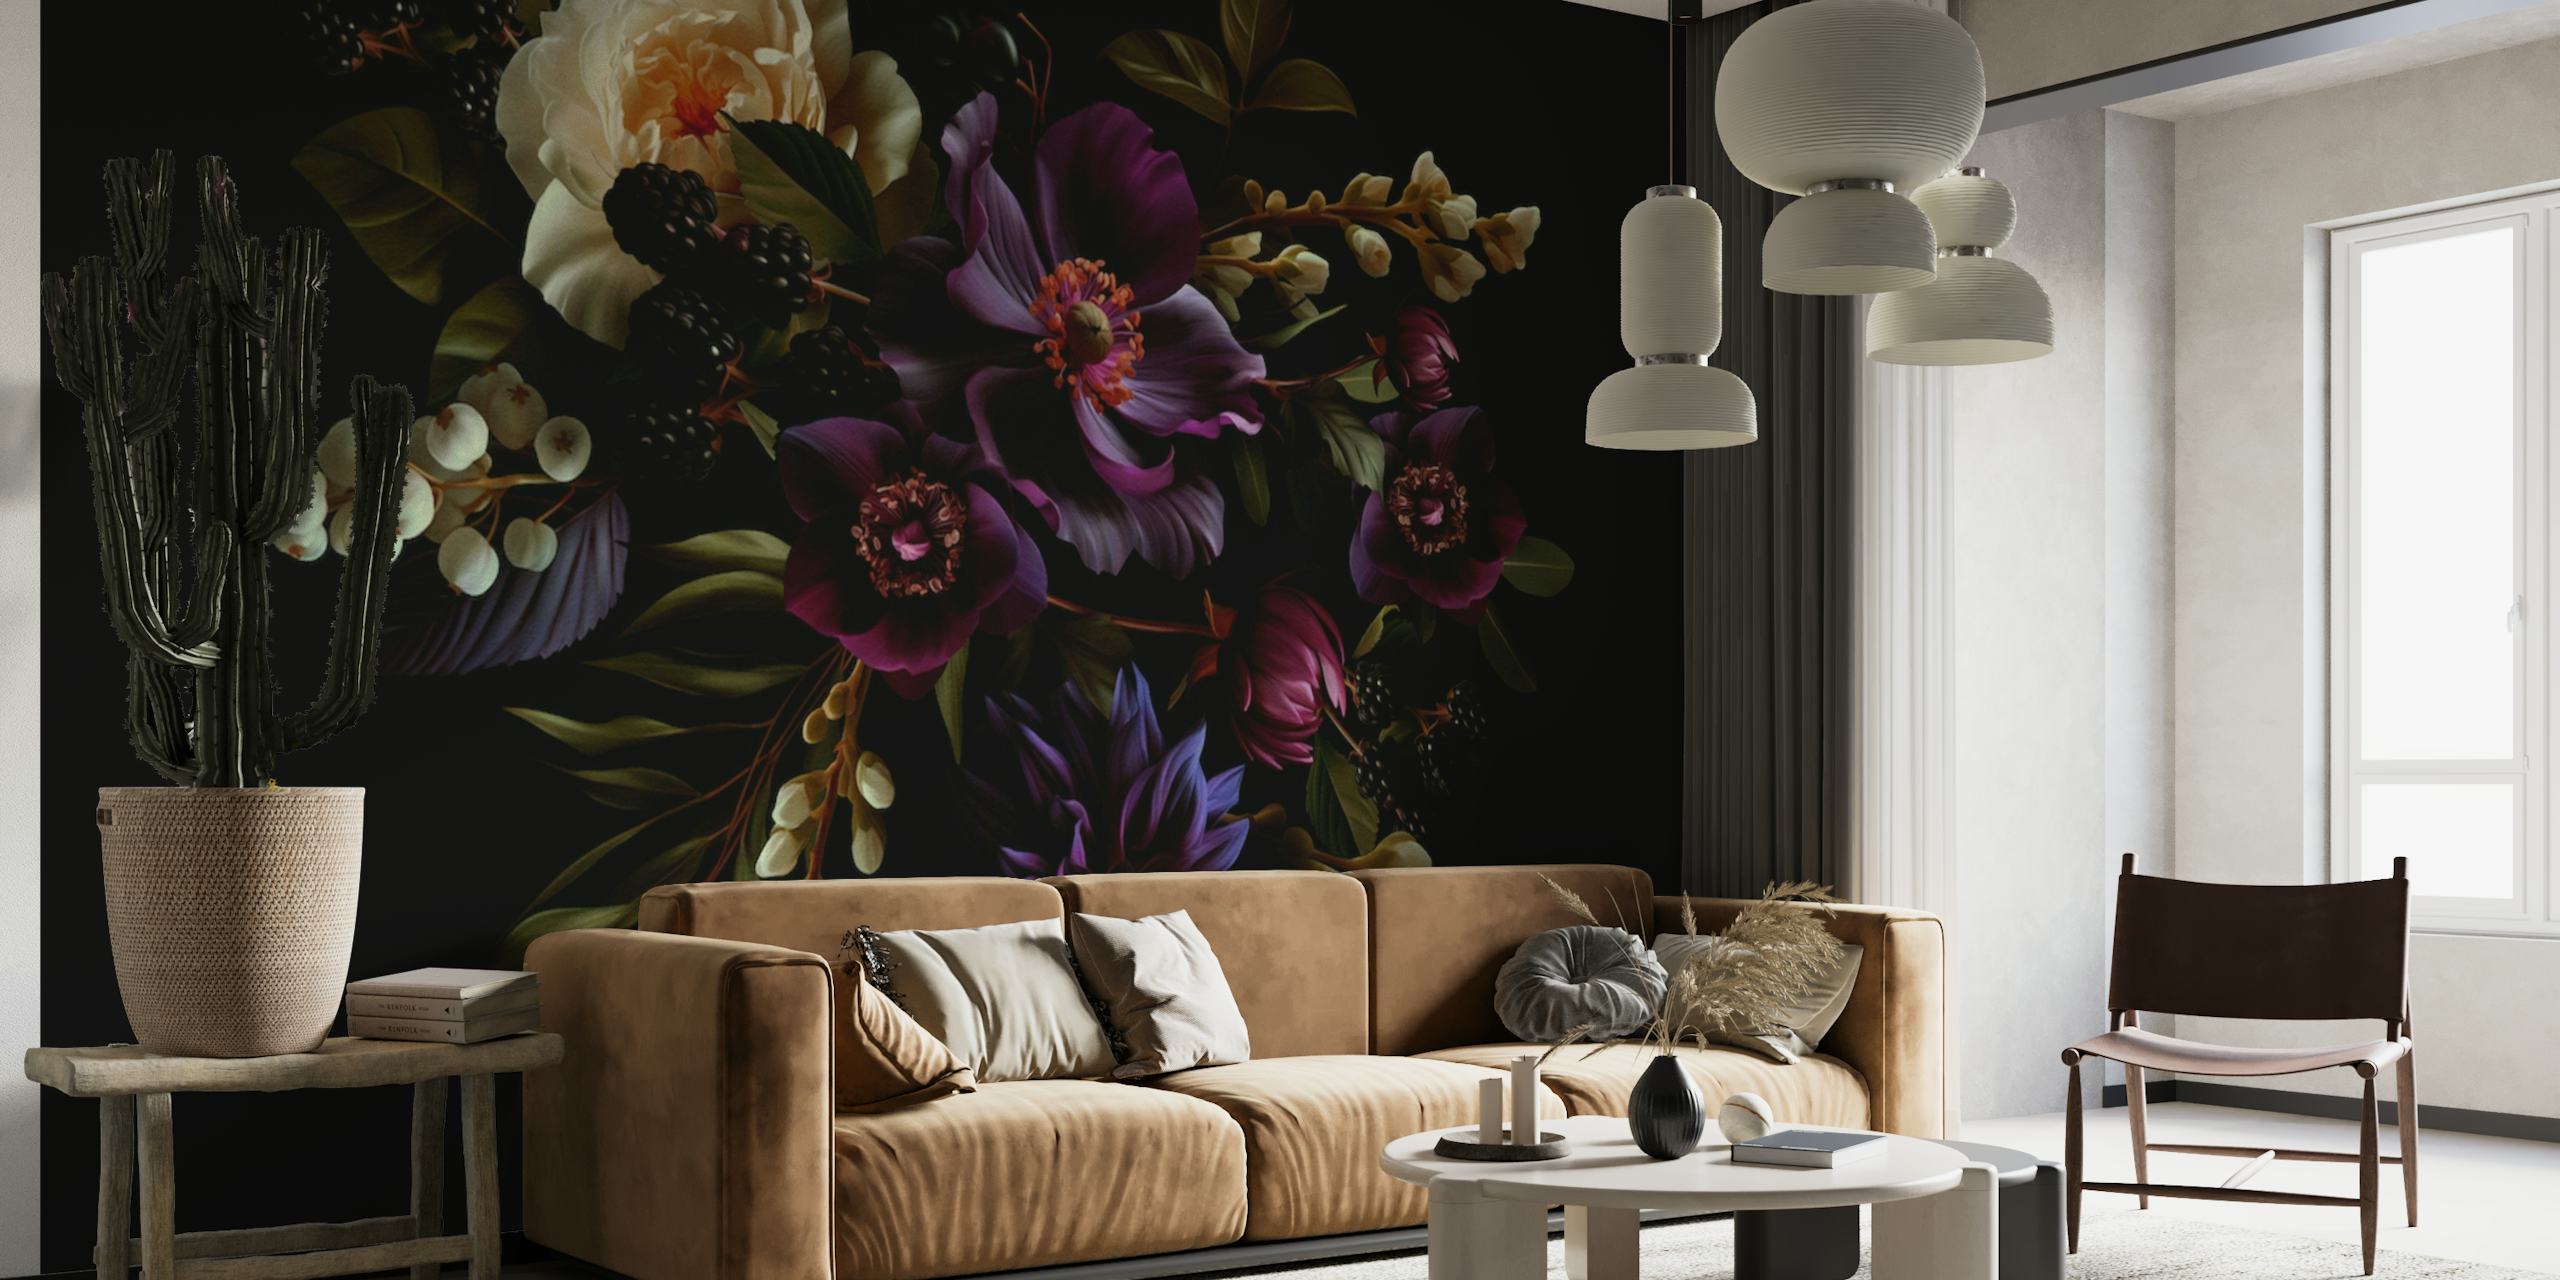 Gothic floral wall mural with dark, moody background and vibrant flowers